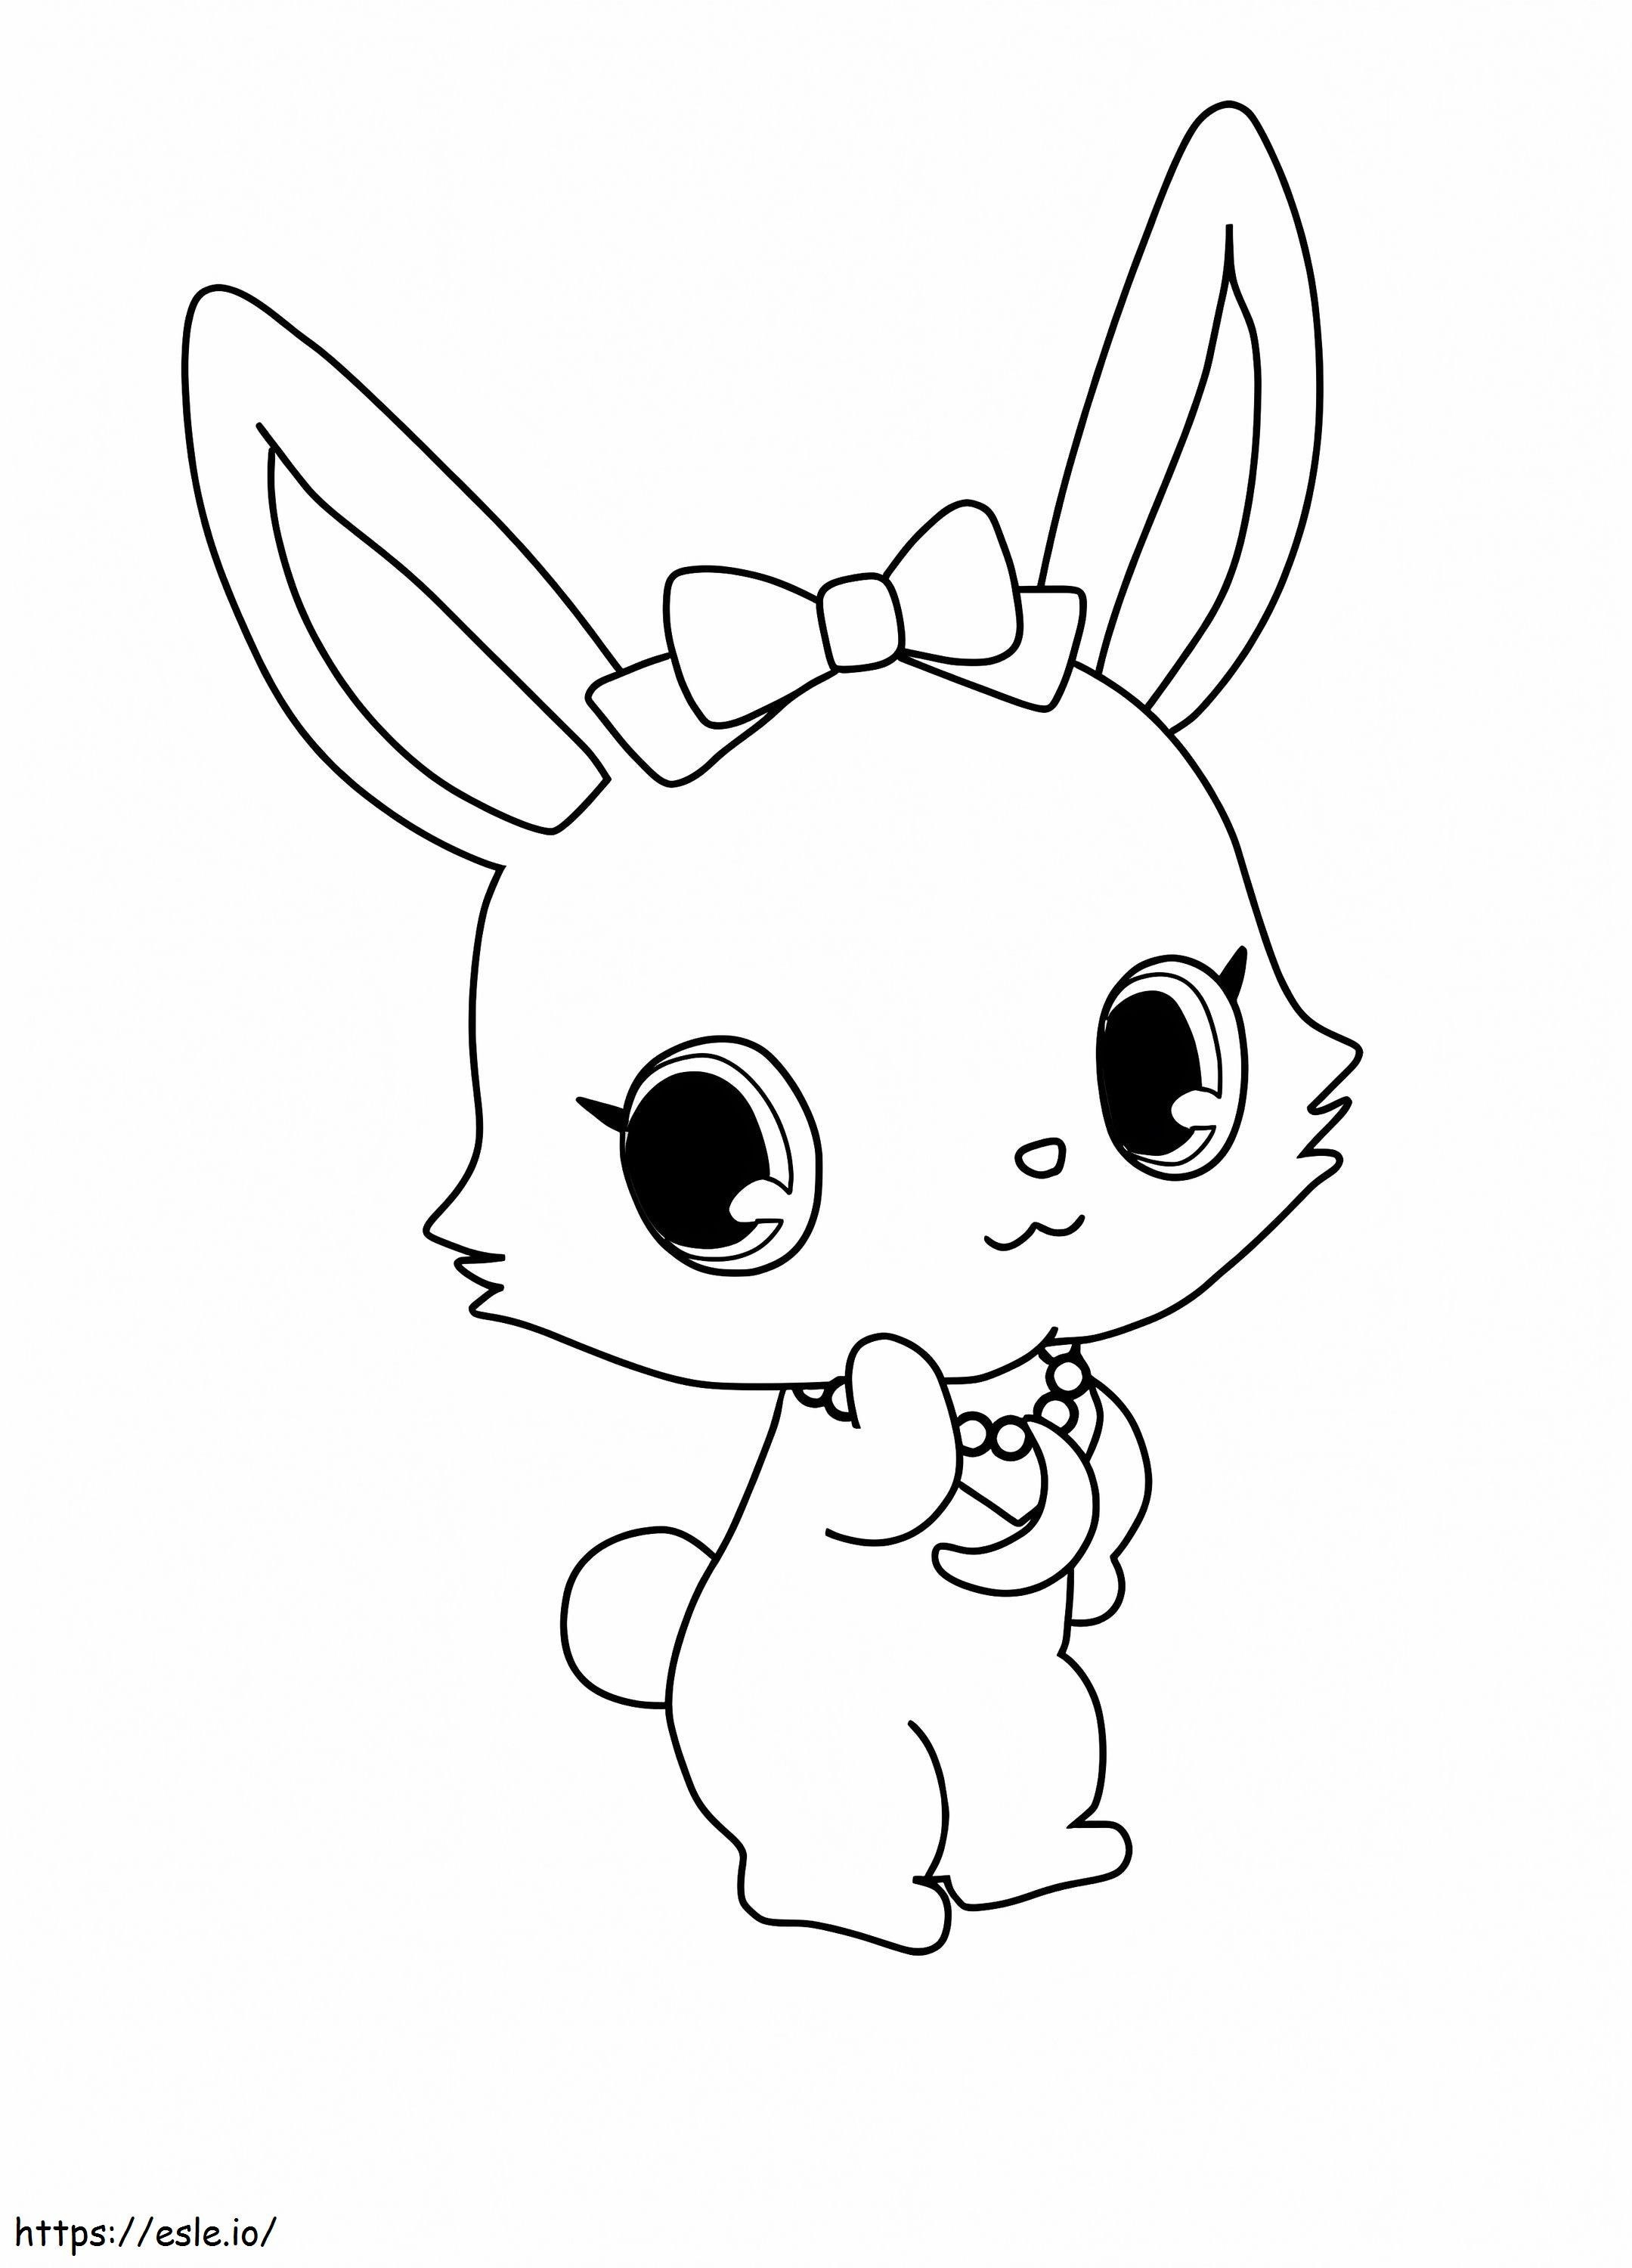 Jewelpets 1 coloring page